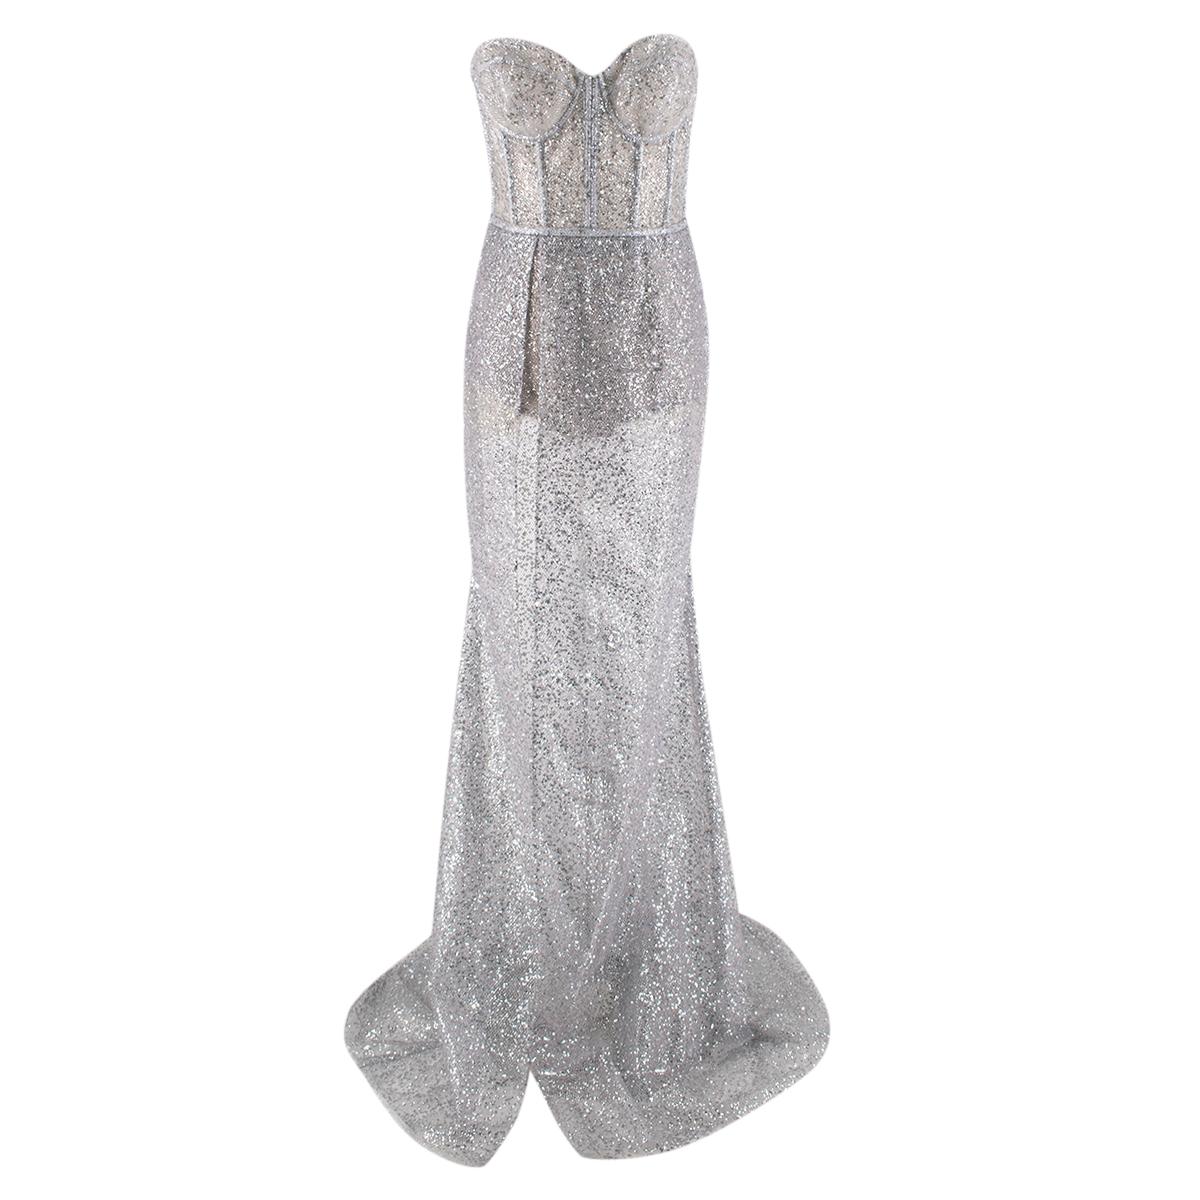 Berta Embellished Silver Mesh Strapless Corset Dress

- A unique couture dress from Berta's evening collection from season Fall/Winter 2019
- The sleeveless dress has a slim fit body with nude lining and a long layers of material 

Dry cleaning only